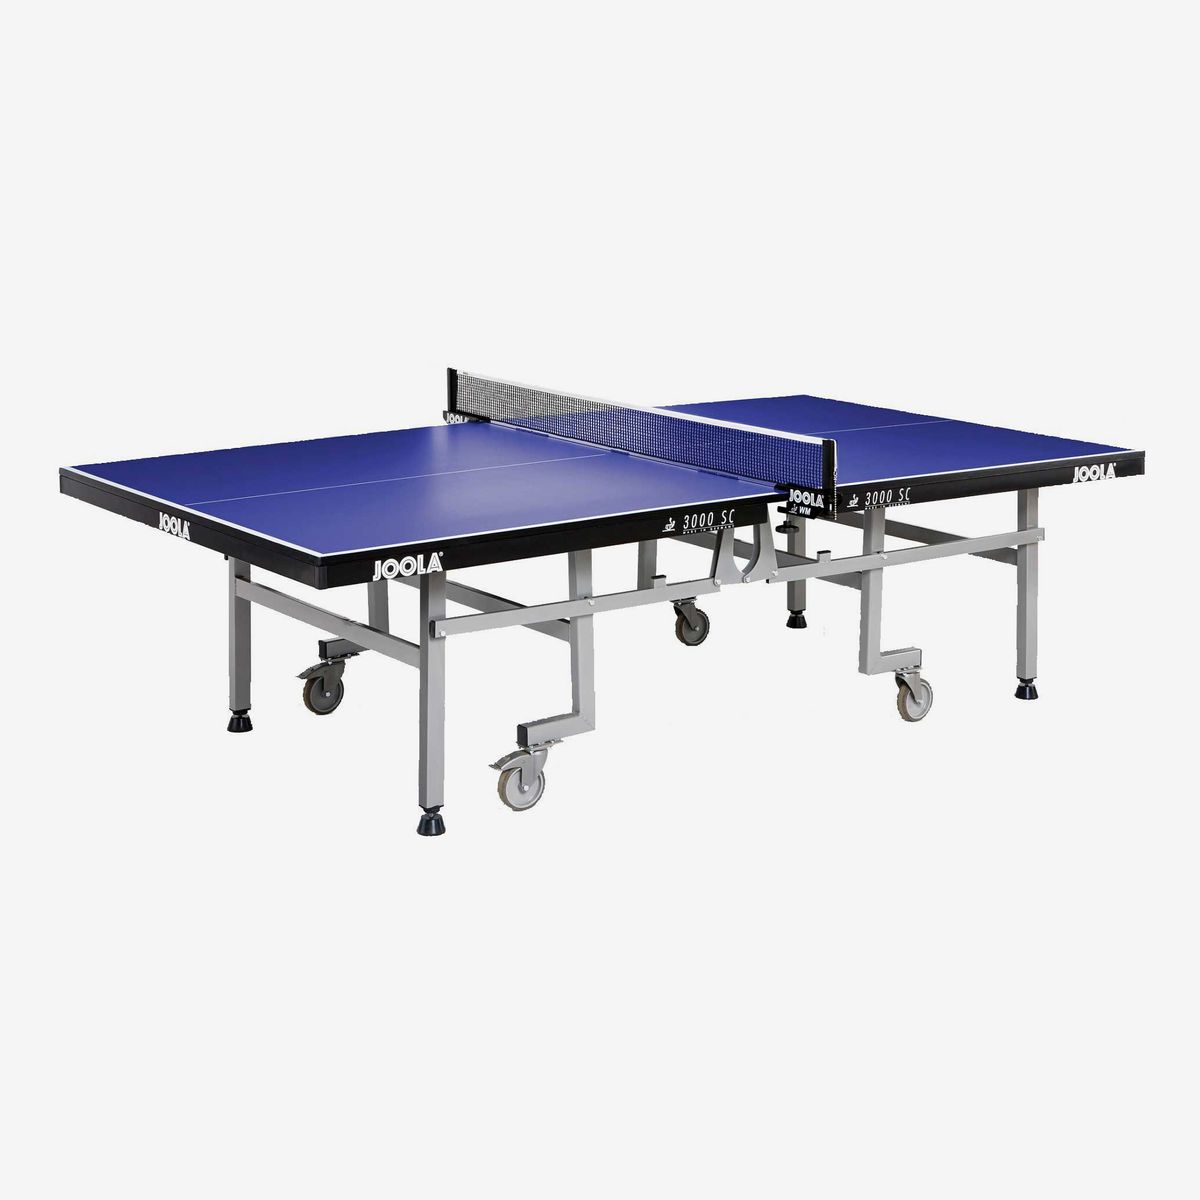 vocheer 6ft Table Tennis Table Foldable Ping Pong Table Portable Strong MDF Plate Easy Quickly Installation Ideal for Smaller Spaces 